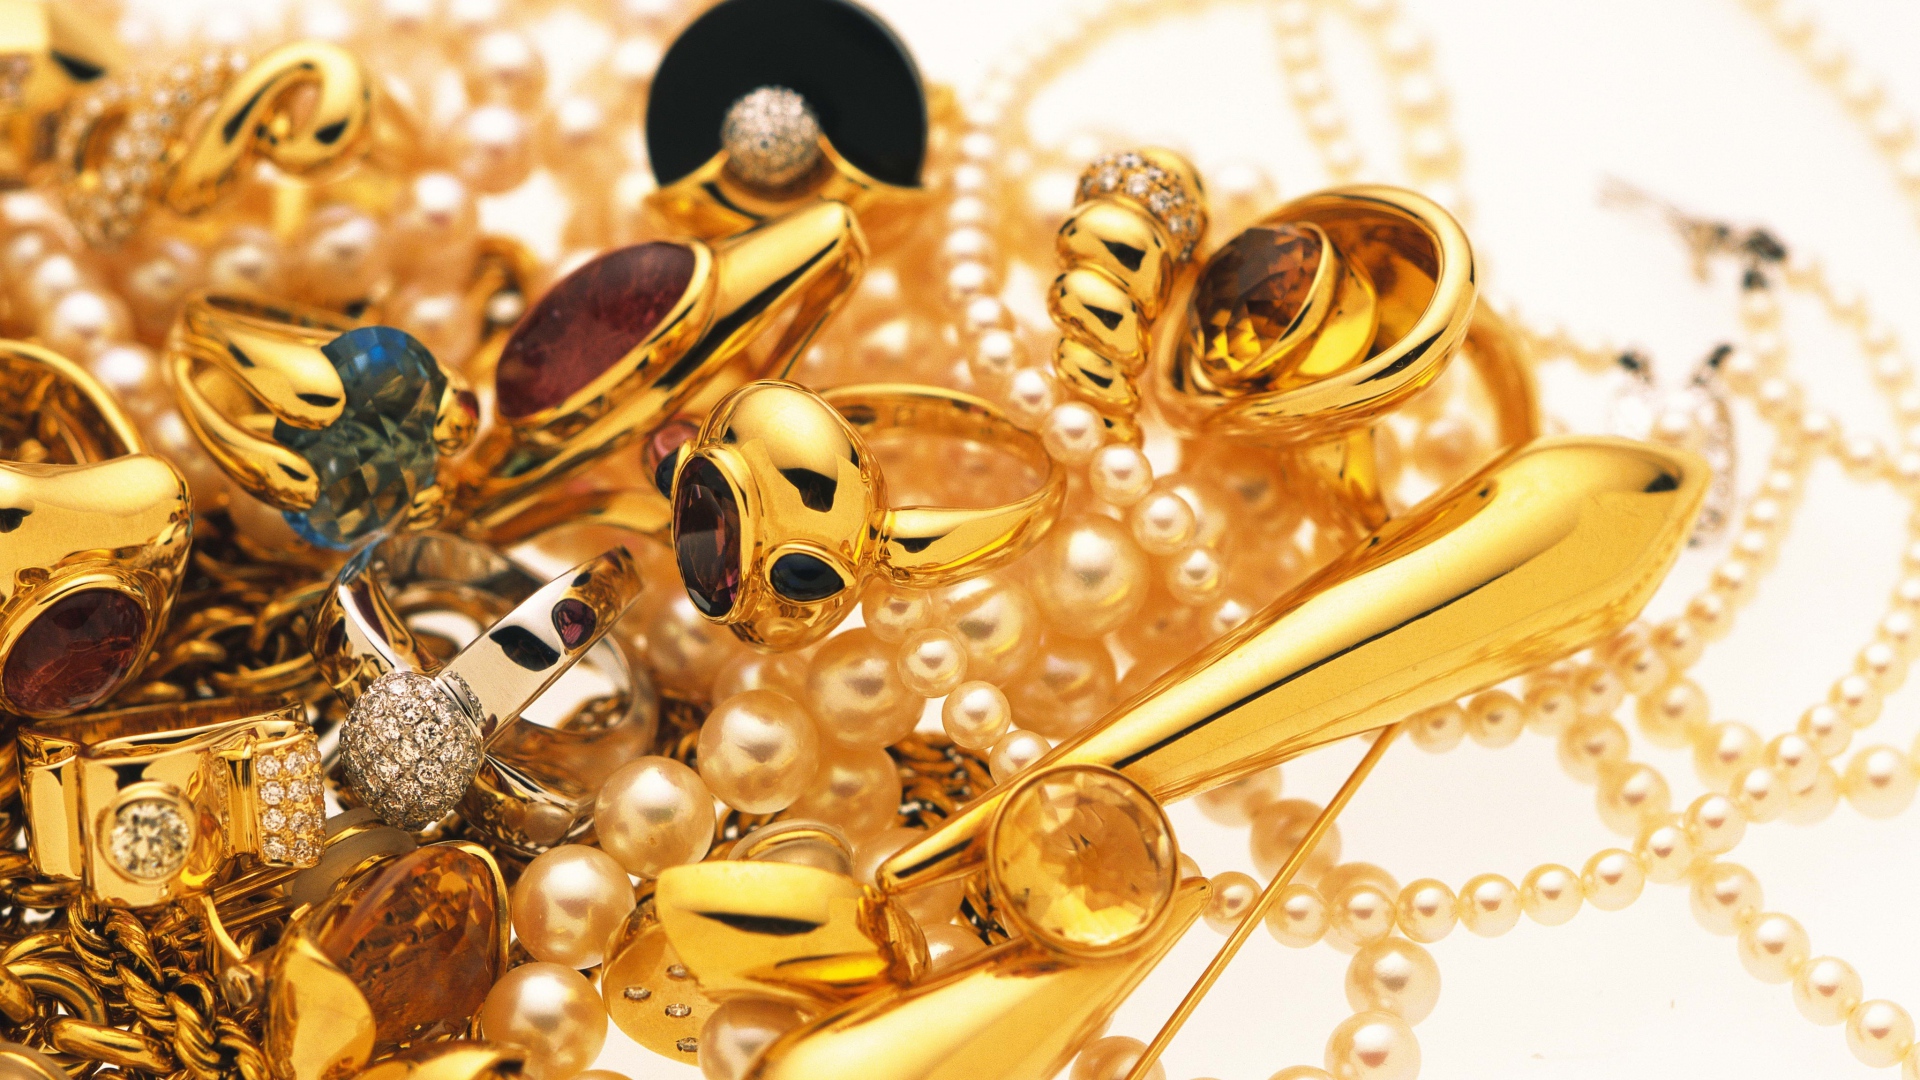 Gold Jewellery HD Wallpaper, Gold Jewellery ImagesNew Wallpapers